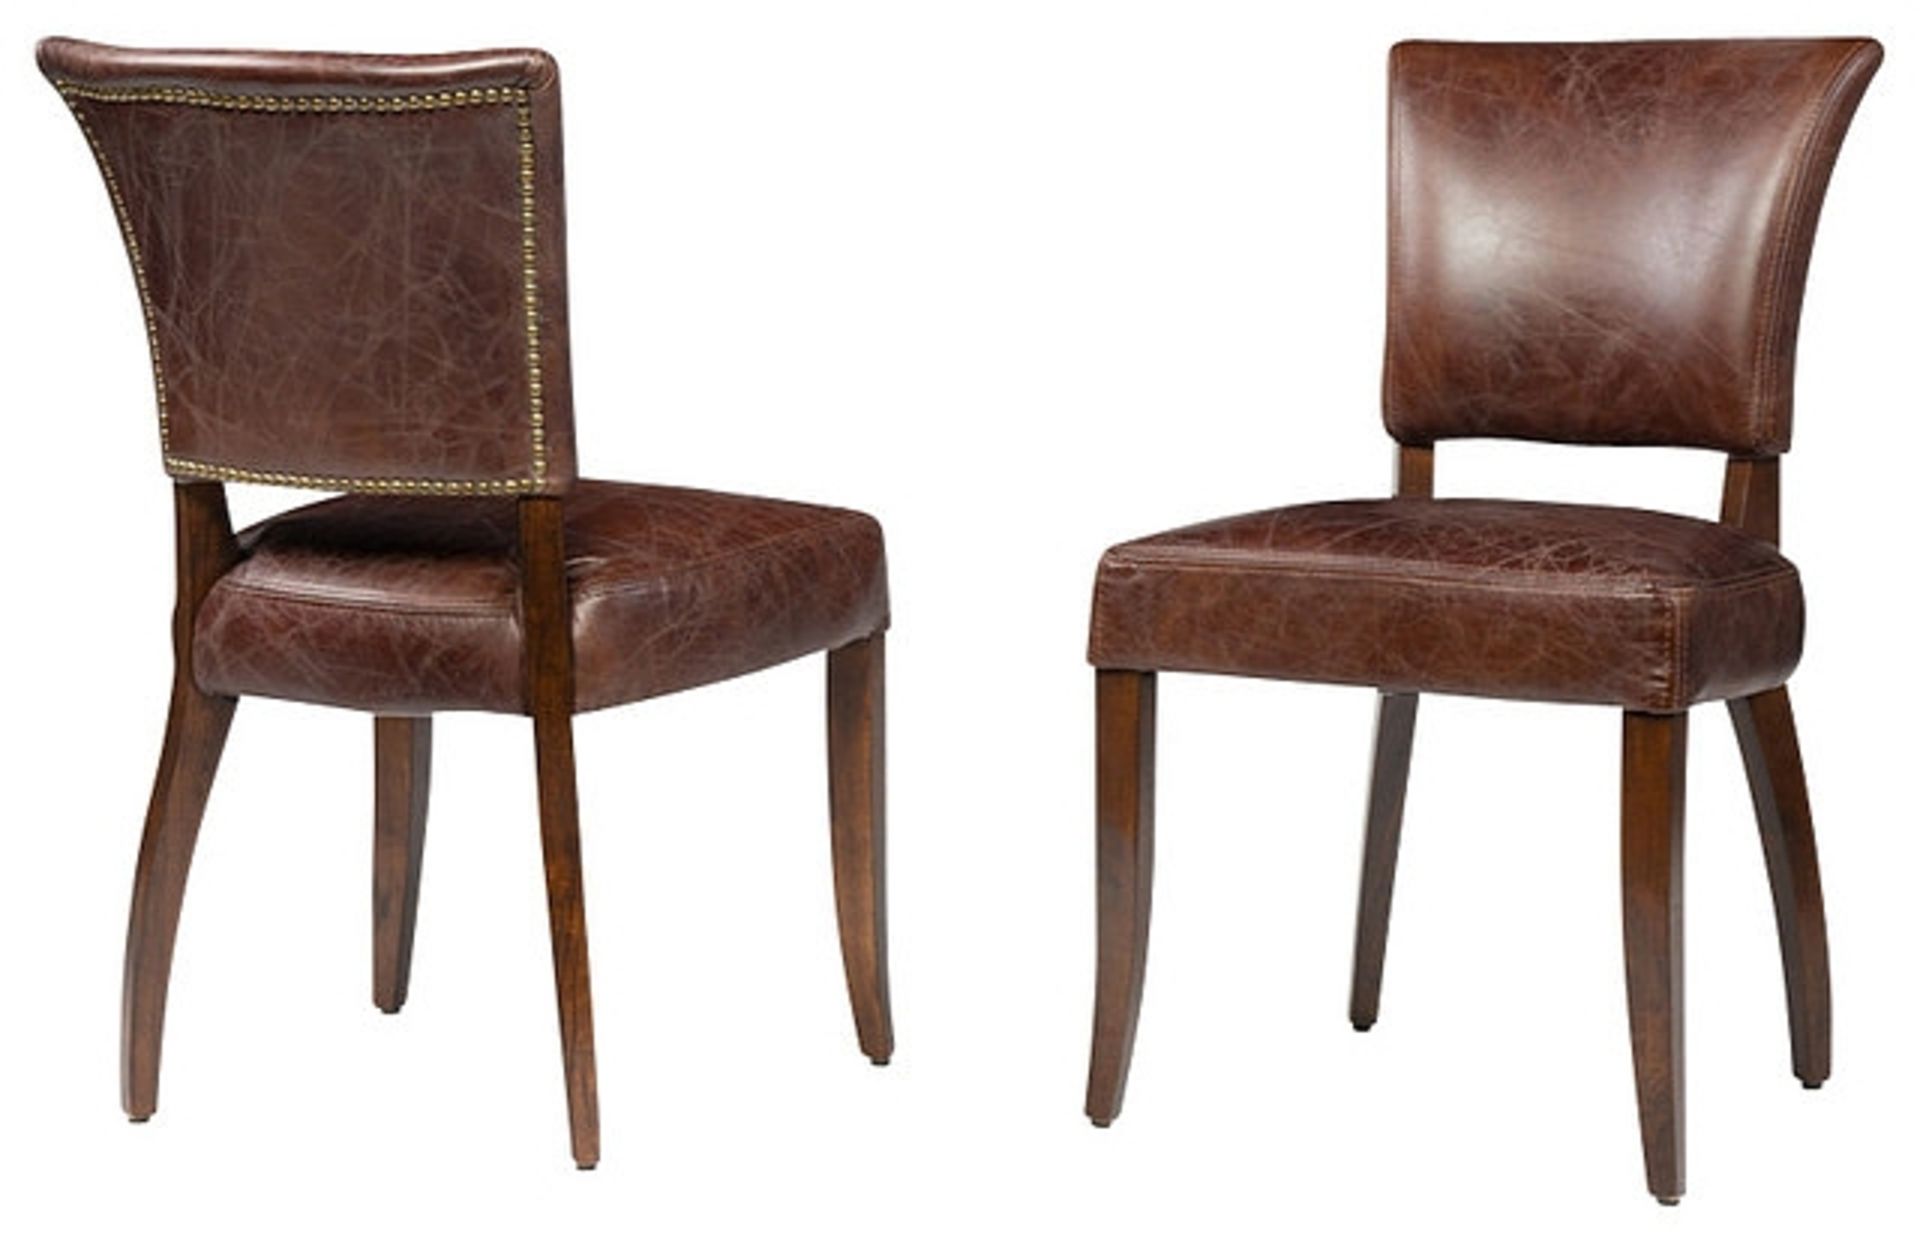 Mimi Dining Chair Full Rebel Leather And Weathered Oak 51 X 65 X 89cm A Range Of Wooden Legs And